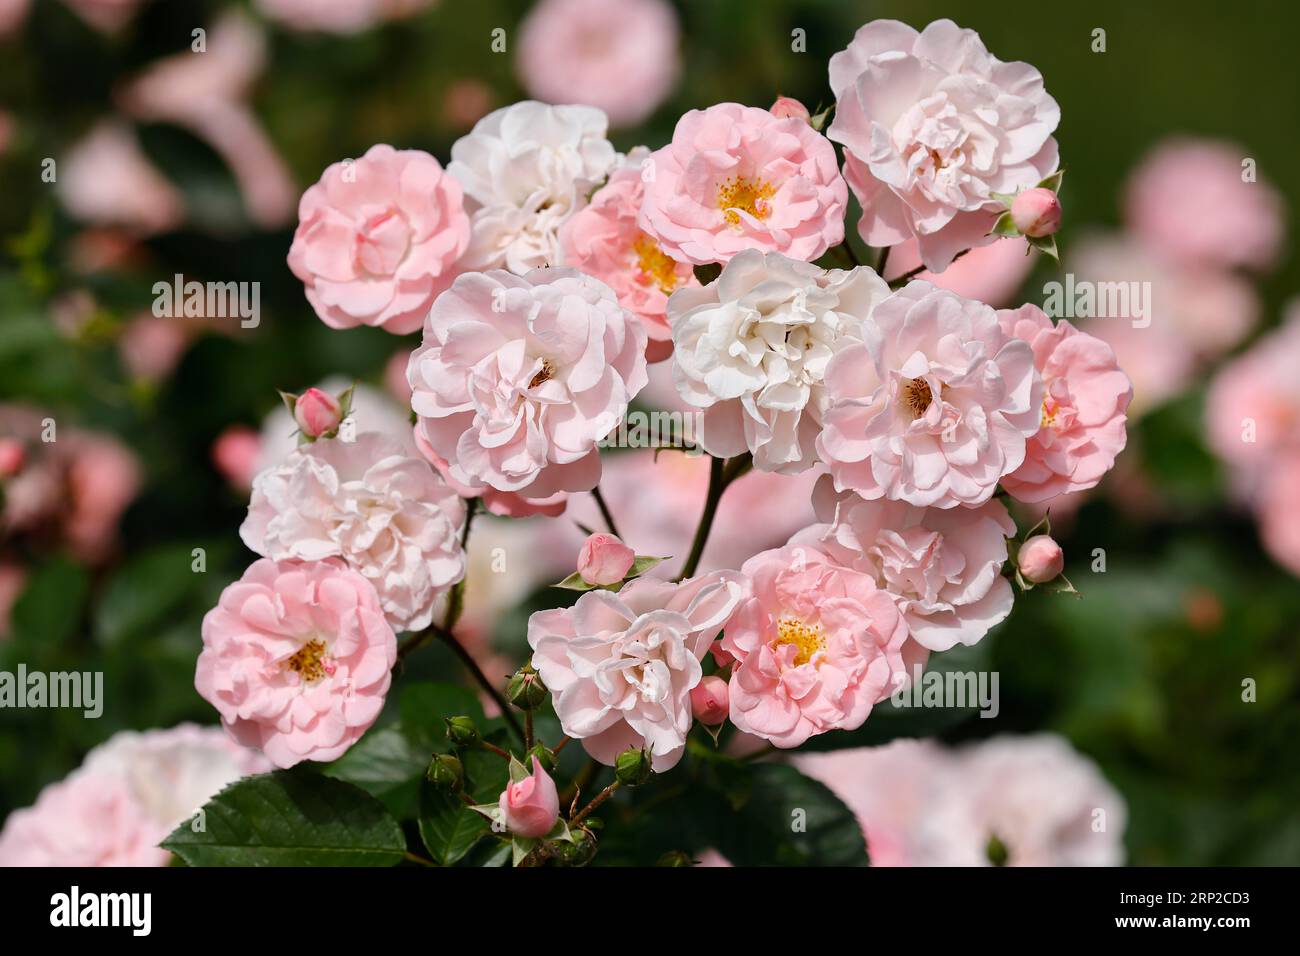 Delicate pink rose (Rosa) flowers, rose blossom, Germany Stock Photo